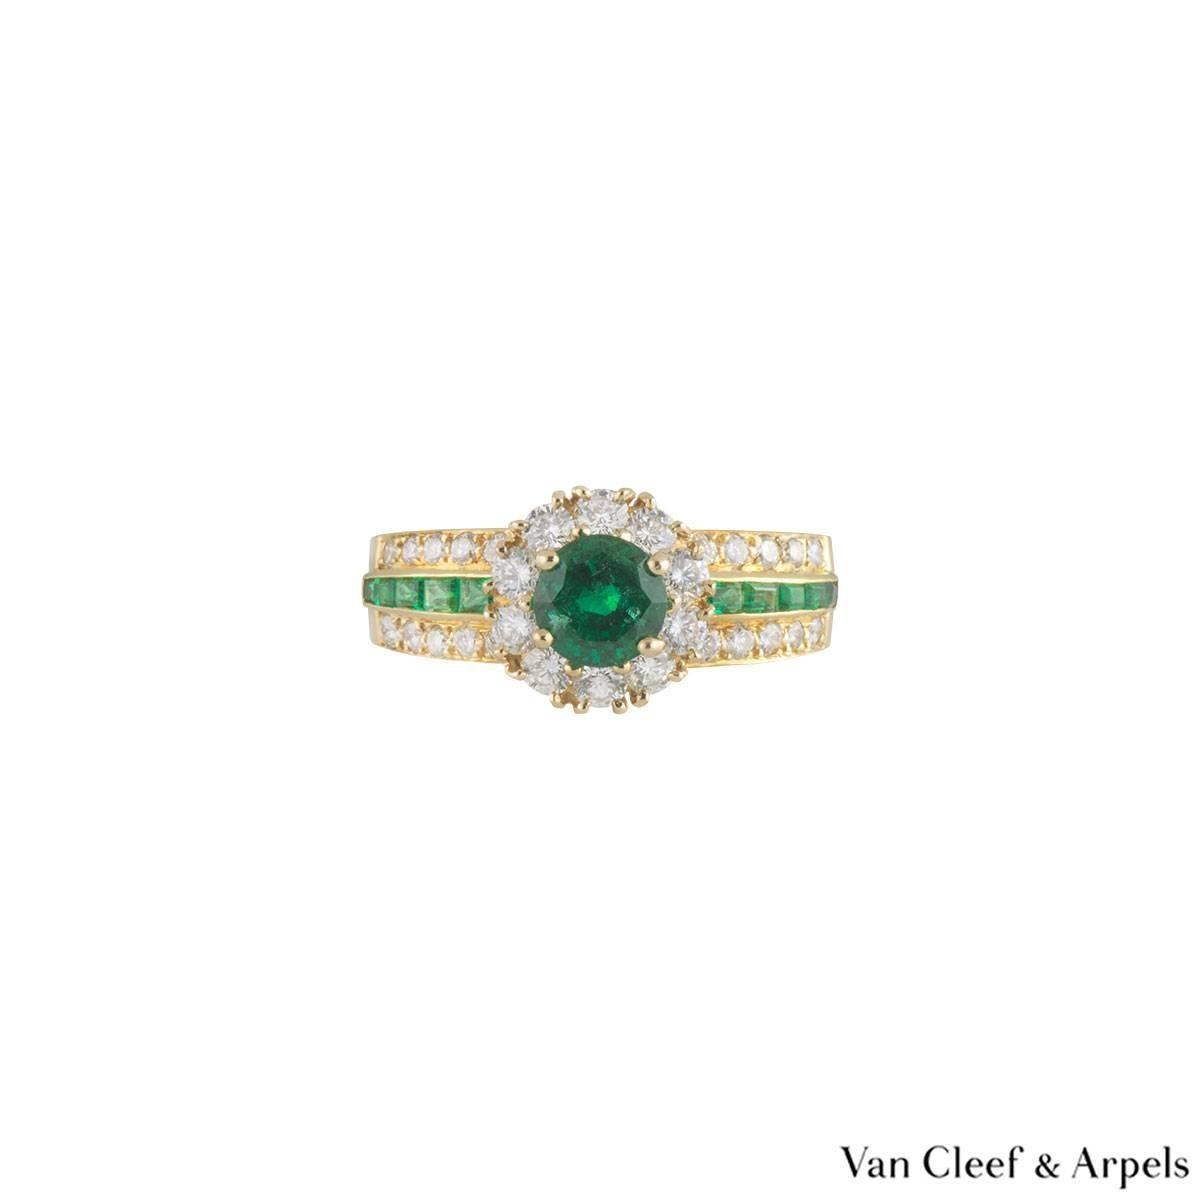 A beautiful 18k yellow gold Van Cleef & Arpels emerald and diamond ring. The ring comprises of a round brilliant cut emerald set to the centre with a halo of round brilliant cut diamonds. The centre is complemented with baguette cut emeralds on the